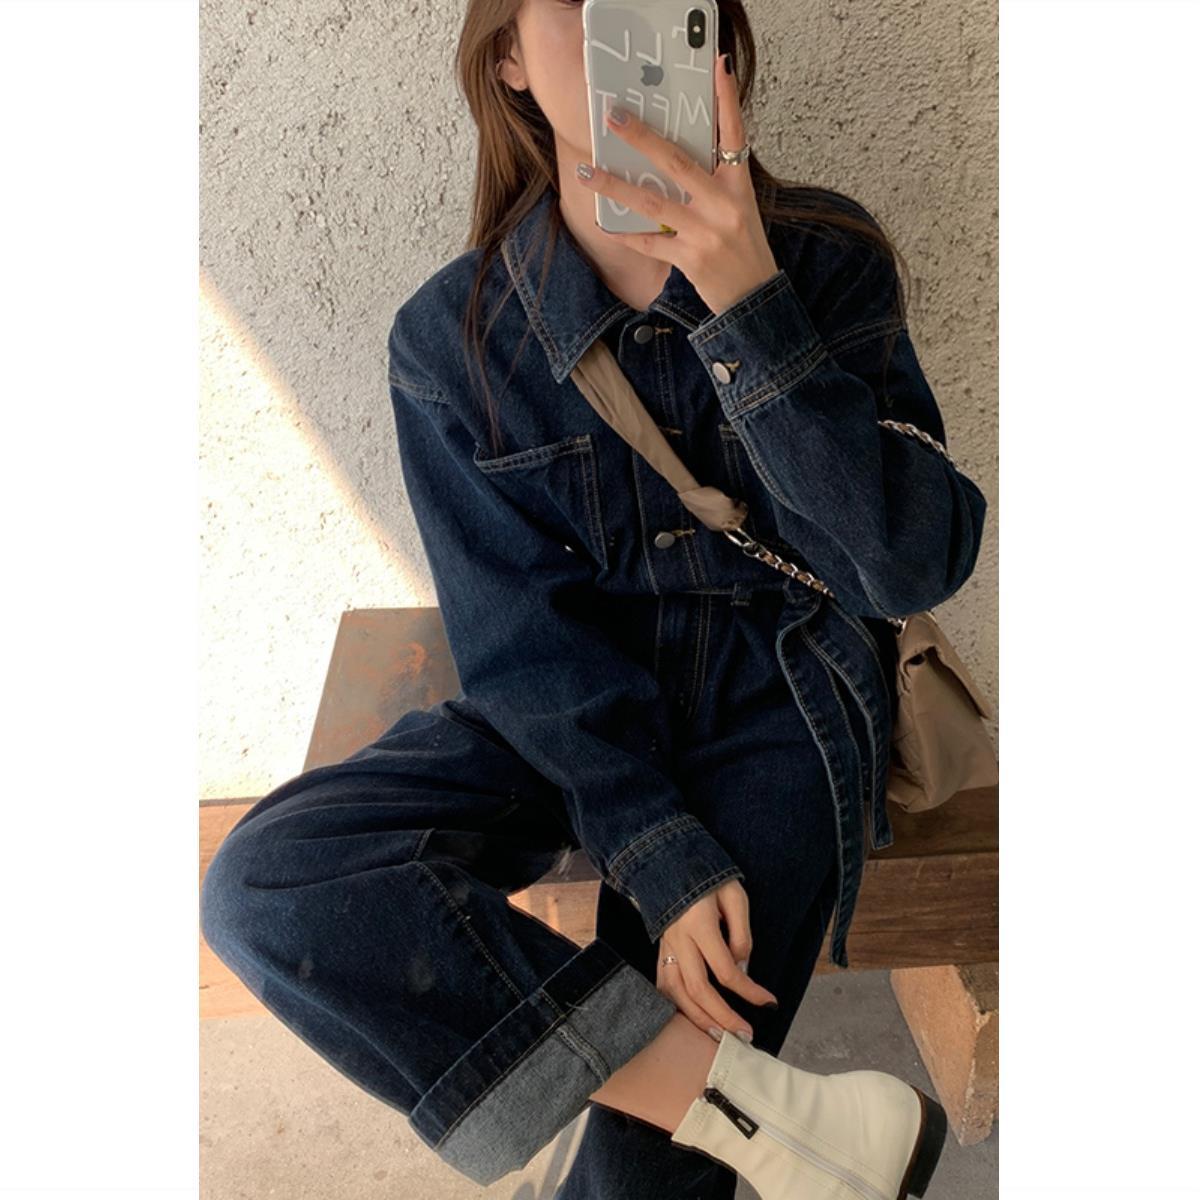 Retro Hong Kong-style jeans suit jumpsuit female autumn  new high-waisted pants straight-leg overalls jumpsuit